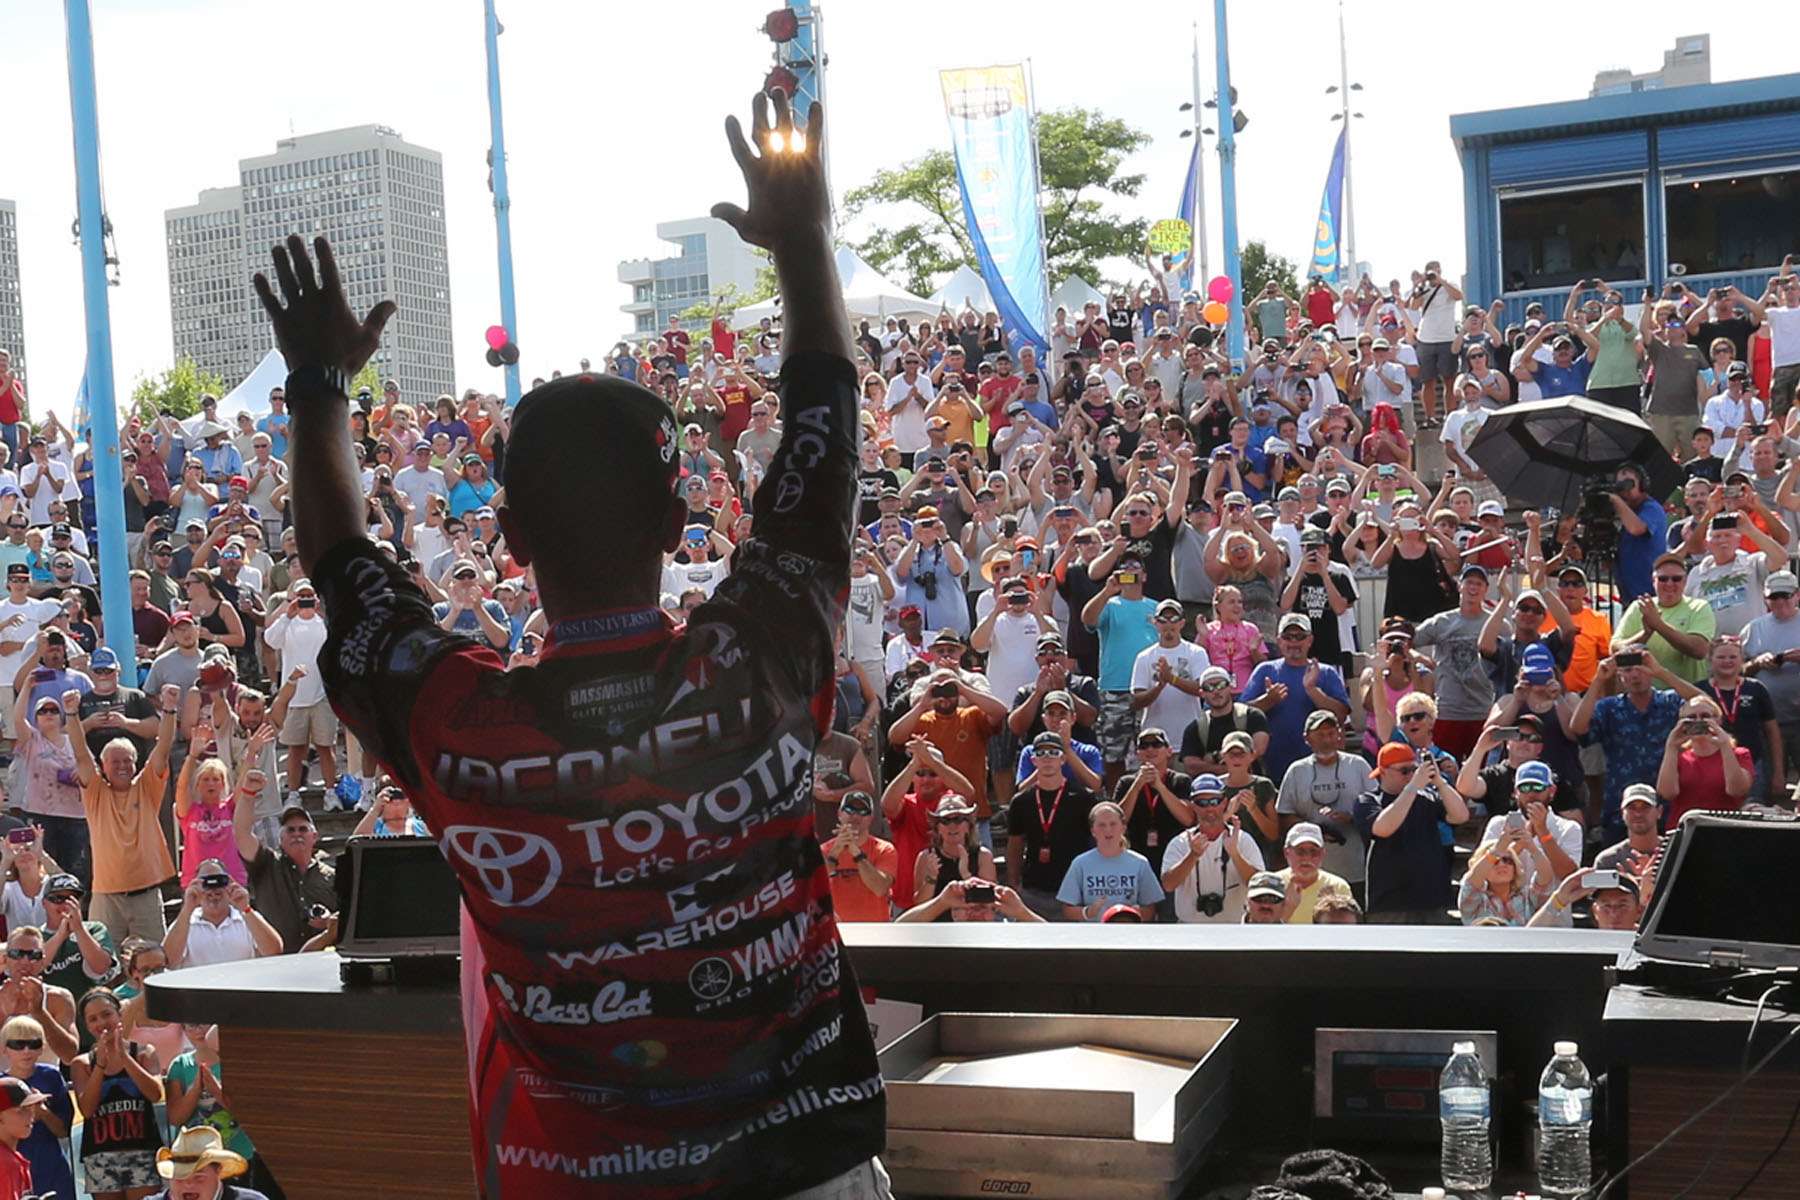 Mike Iaconelli has never been scared to answer a question. His interviews and opinions have entertained bass fishing fans for over a decade, and his list of accomplishments has earned him regard among pros and weekend anglers around the world. Ike recently took the time to answer five more questions about his bass fishing career in this revealing 5 Questions interview.